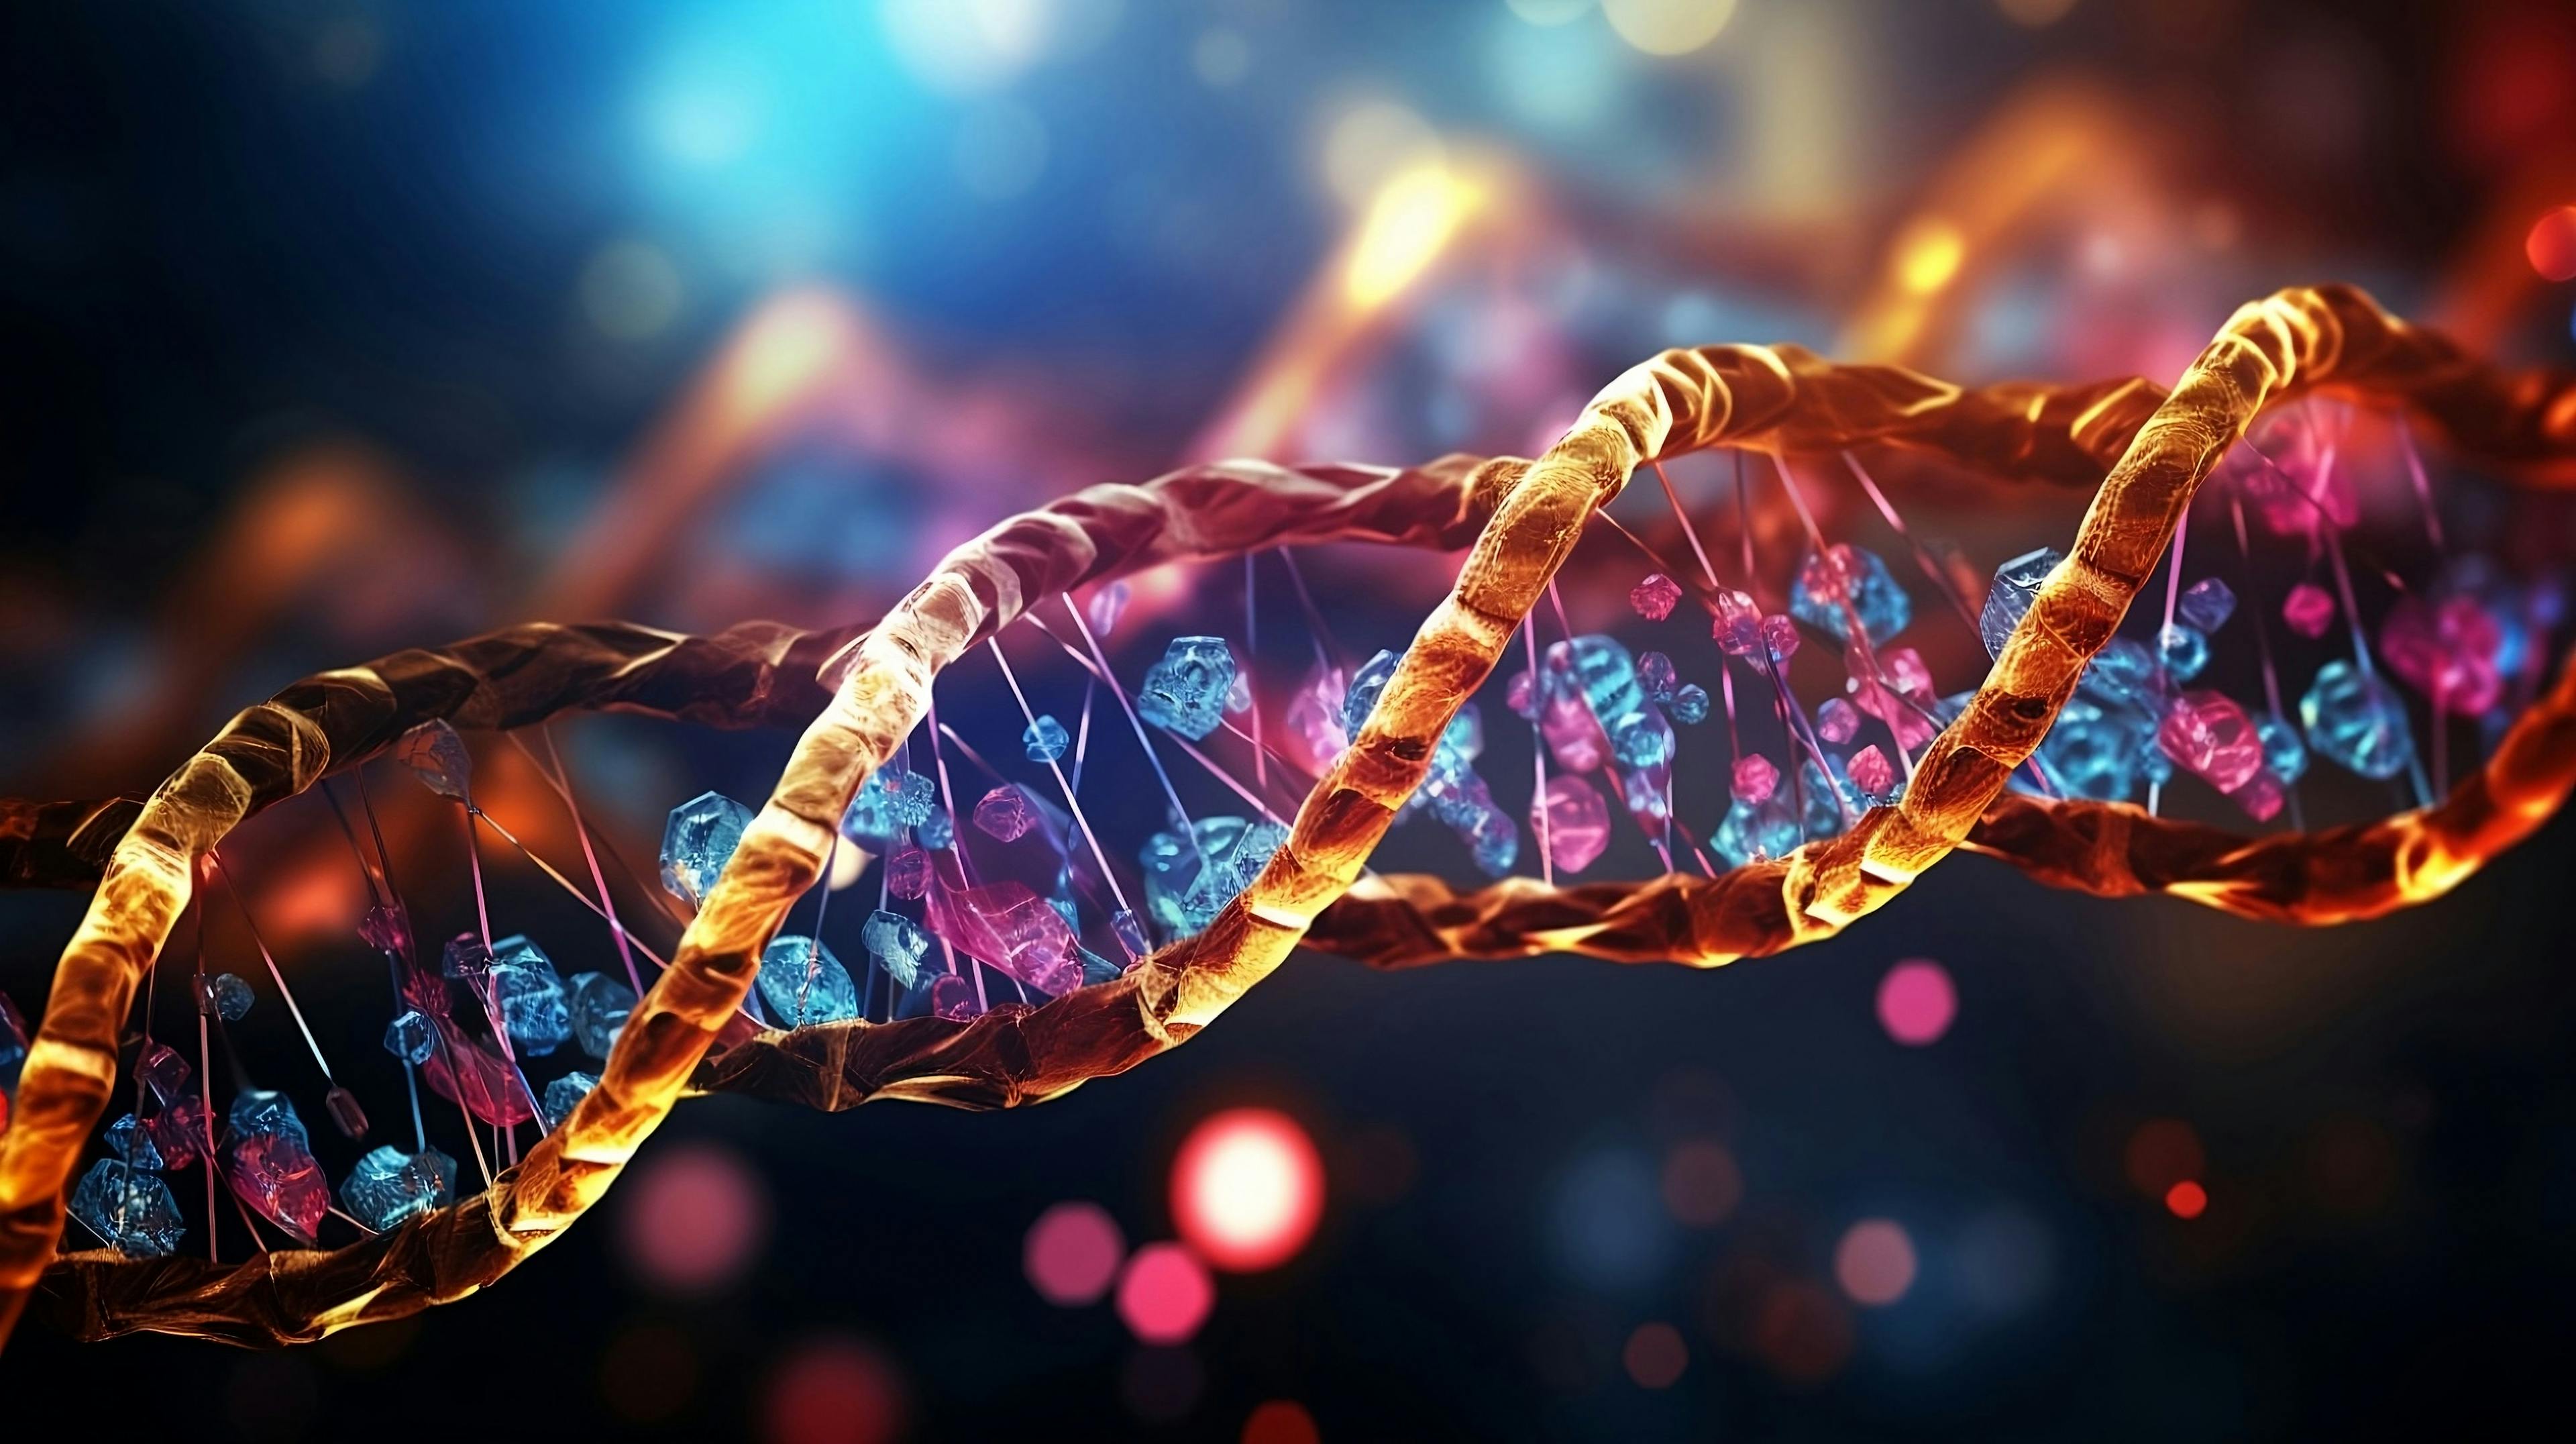 Biotechnology: The Science of Genetic Engineering. Generated with AI. | Image Credit: © Polypicsell - stock.adobe.com